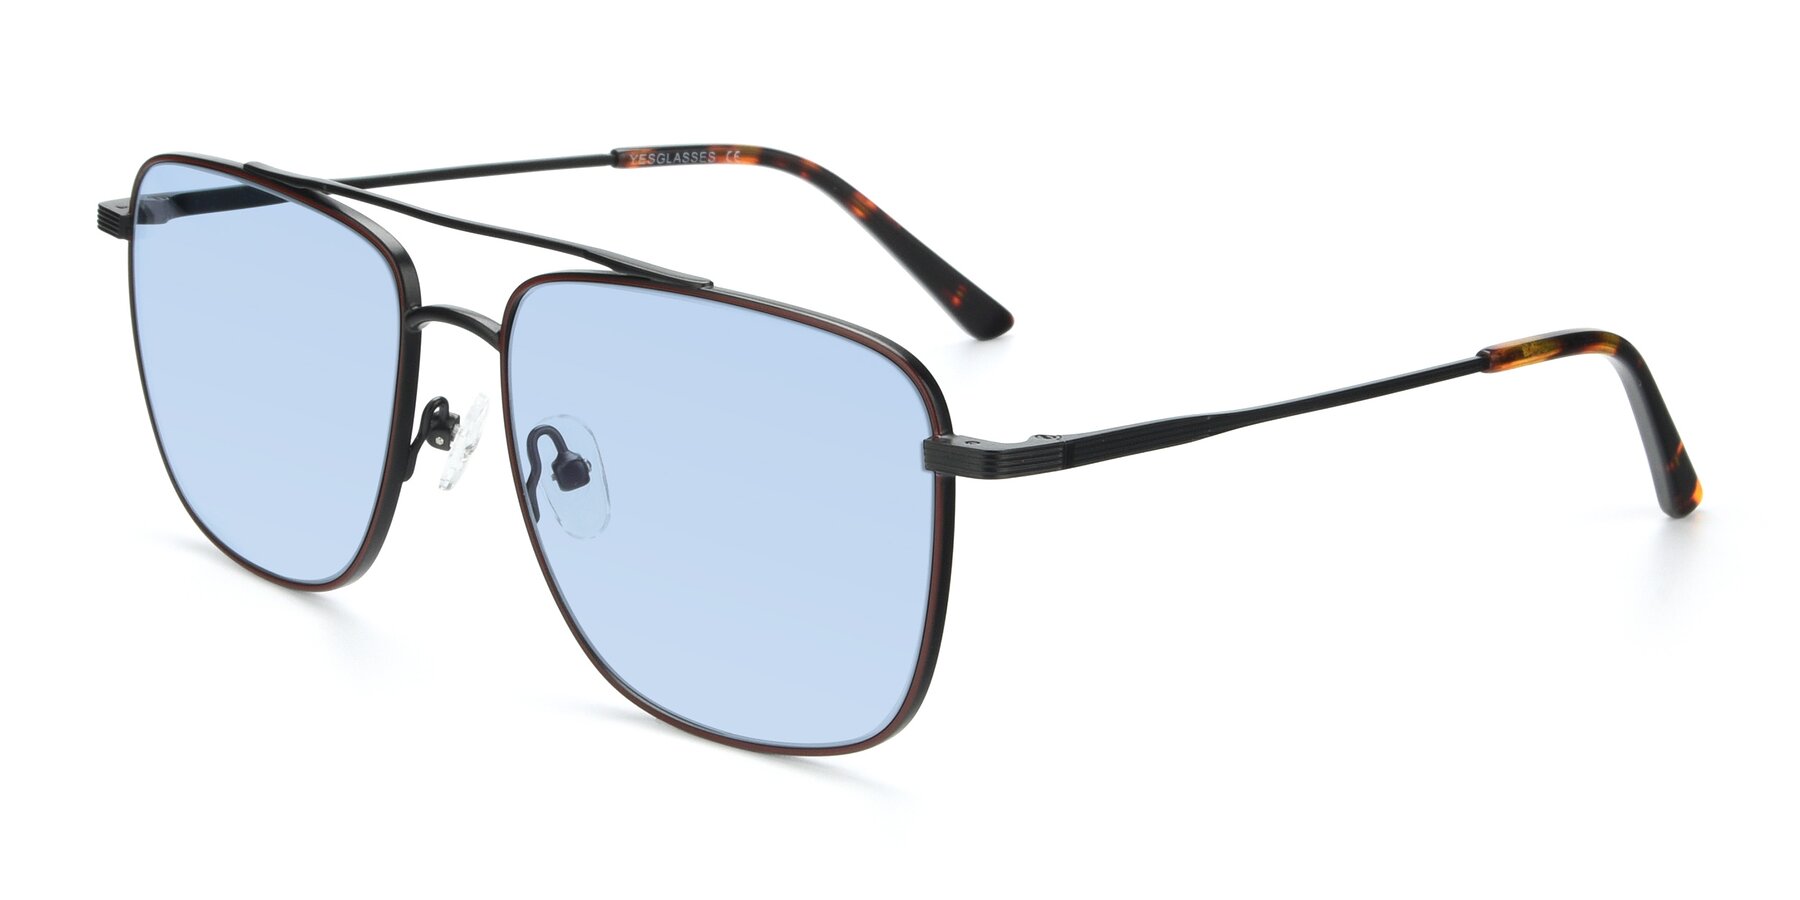 Angle of 9519 in Brown-Black with Light Blue Tinted Lenses